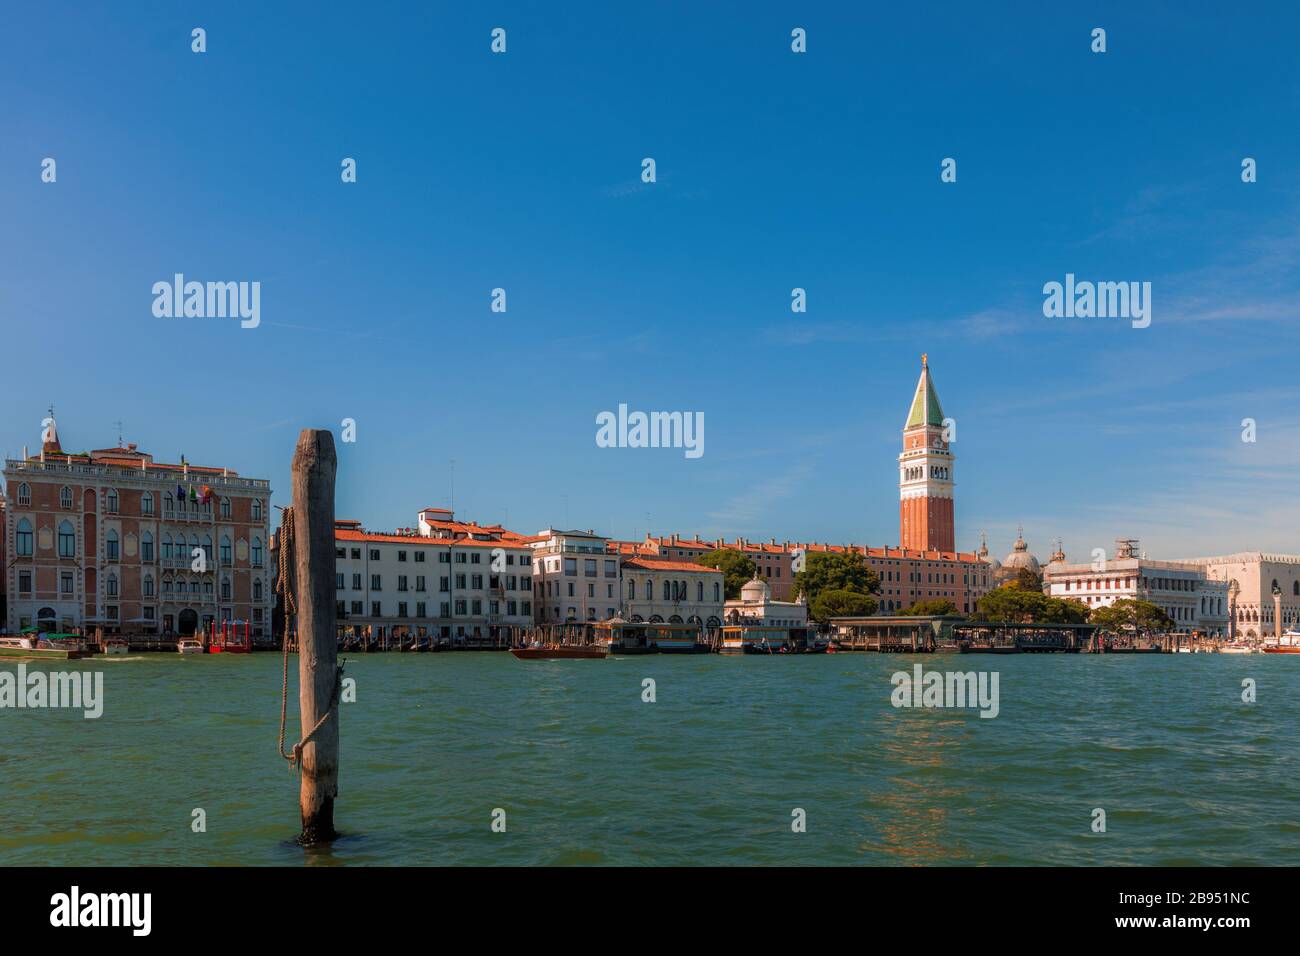 Looking out towards St. Mark's Square from the Grand Canal in Venice, Italy Stock Photo